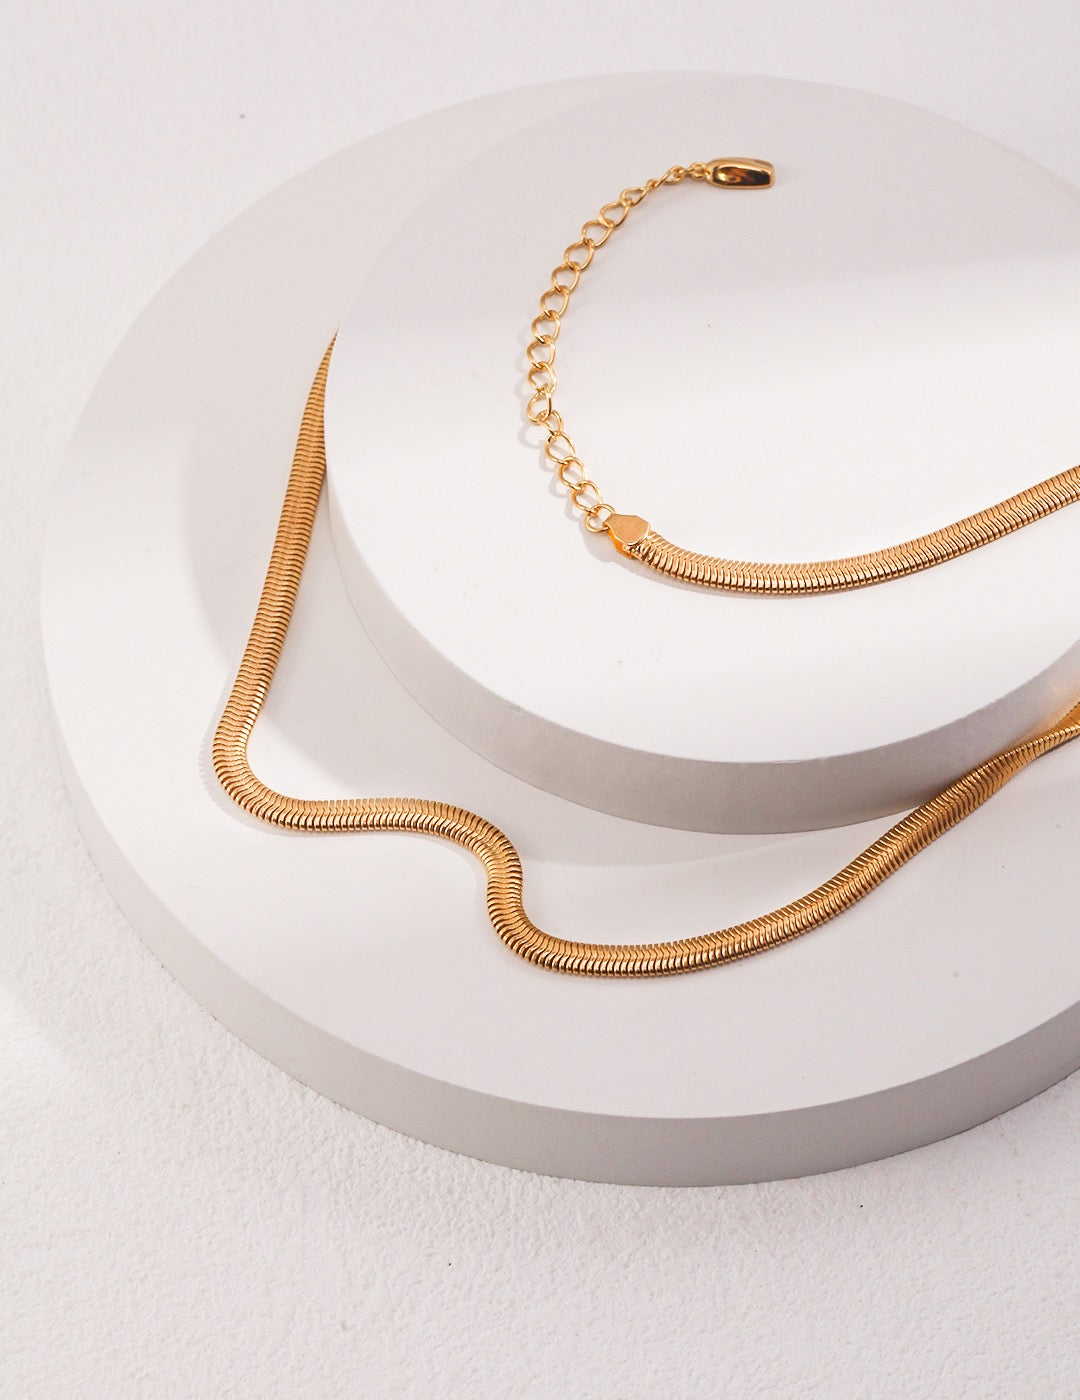 Necklace Embodying Durability and Timeless Grace- S925 Sterling Silver with 18K Gold Vermeil - Embrace your Inner Resilience - Crafted with care and designed to last - The perfect accessory for every confident and empowered woman